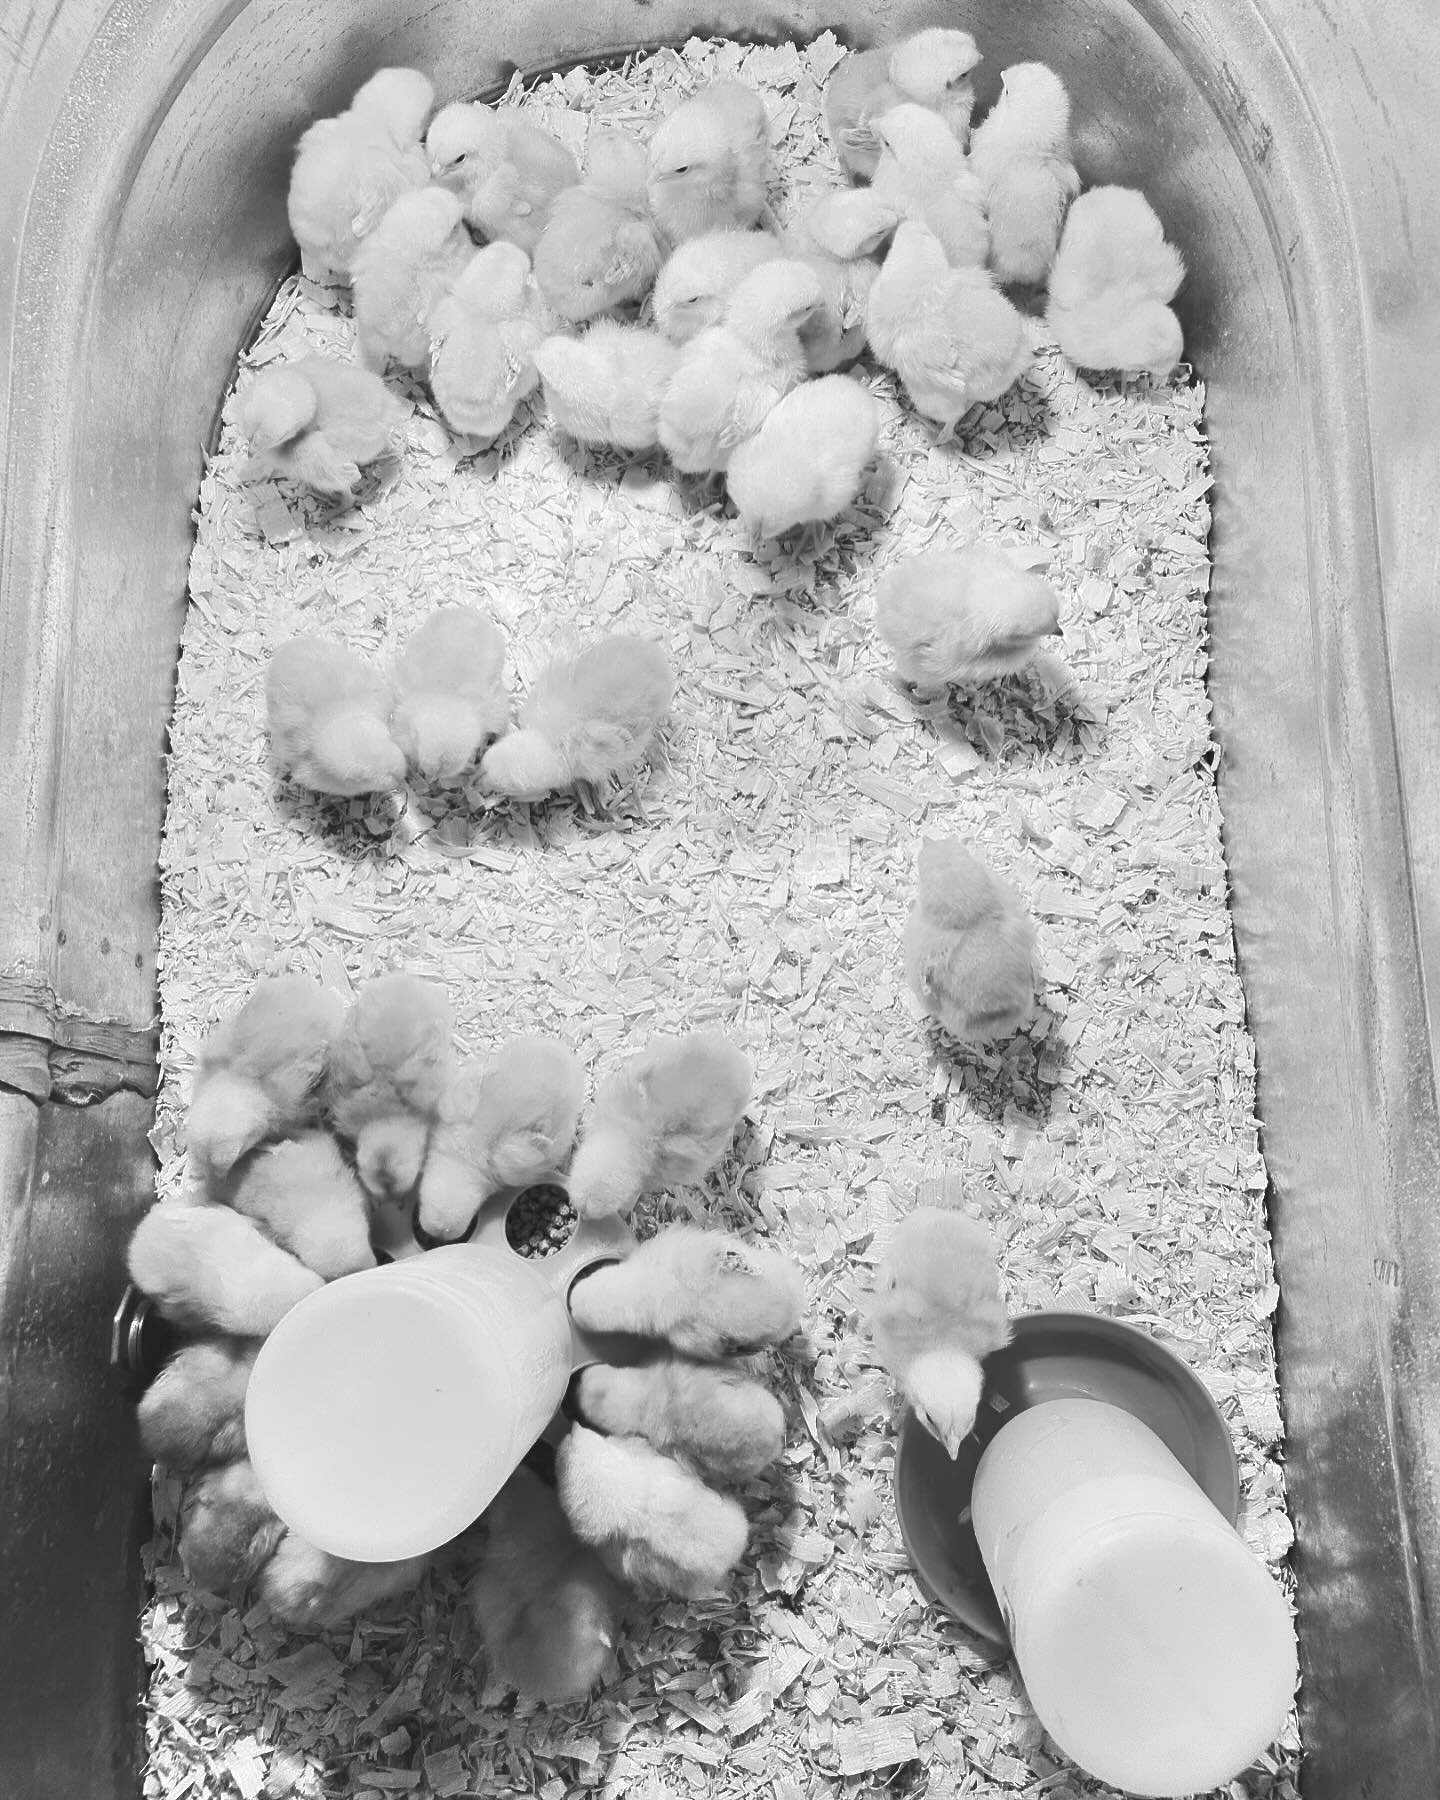 Today began like most
a warm snuggle
kisses and smiles&nbsp;
from my still little one
Once I was up&nbsp;
the first thing I did was hold&nbsp;
one of the fresh new chicks&nbsp;
as it died
I thought they were already dead when I found it
a soft flat b